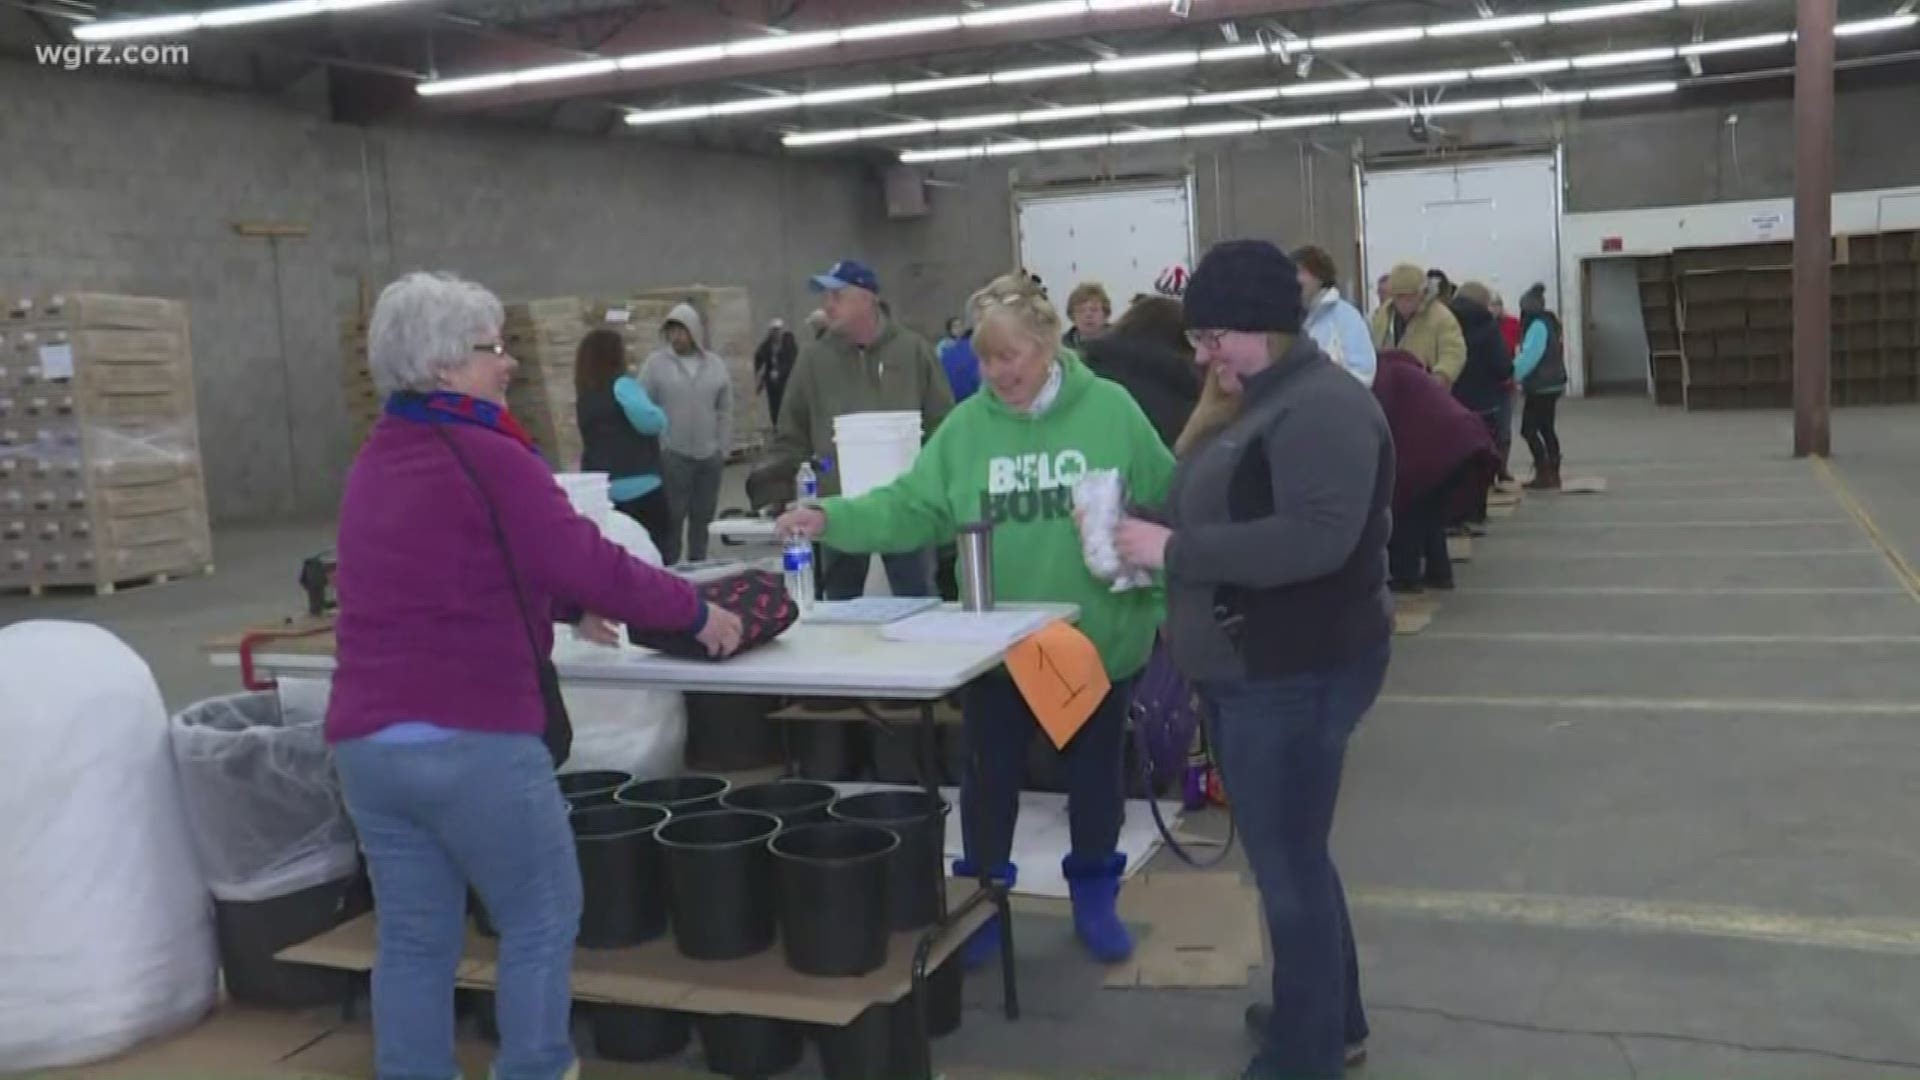 Hundreds of volunteers are spending their Saturday unloading more than 250,000 fresh flowers. They're assembling 30,000 bouquets and packing them for delivery.